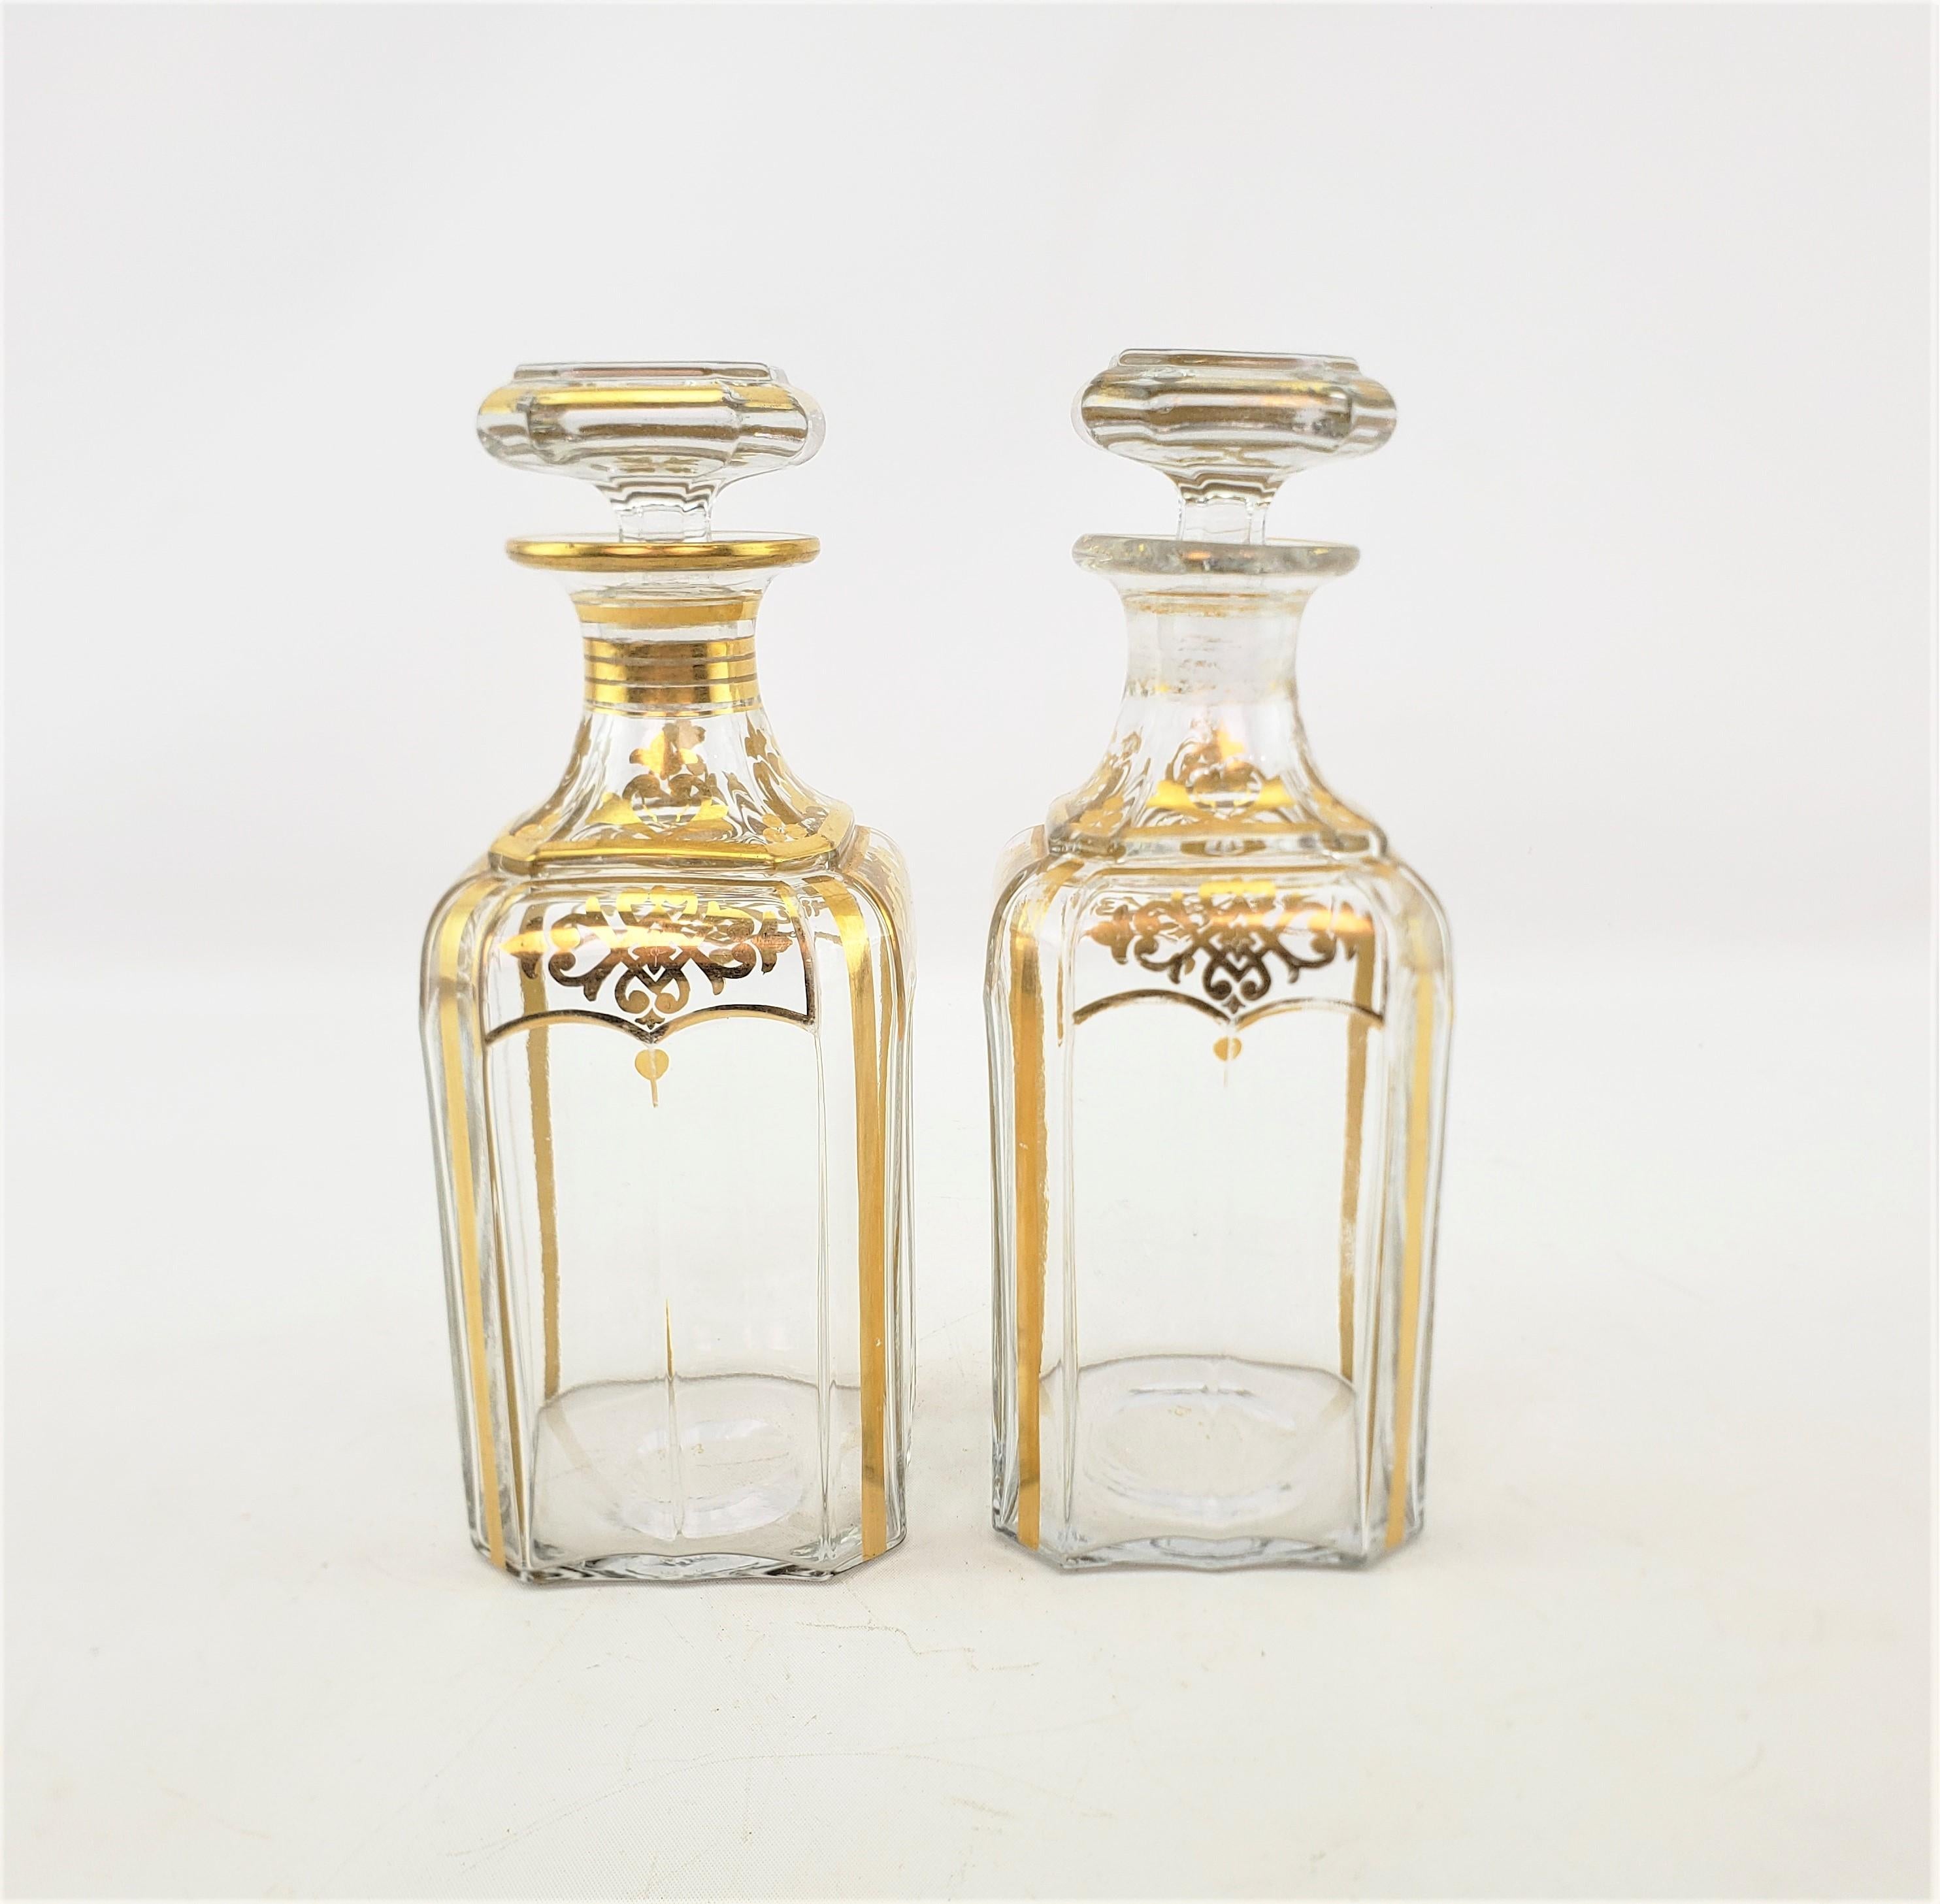 Pair of Antique French Clear Crystal Bottle Decanters with Gilt Decoration In Good Condition For Sale In Hamilton, Ontario